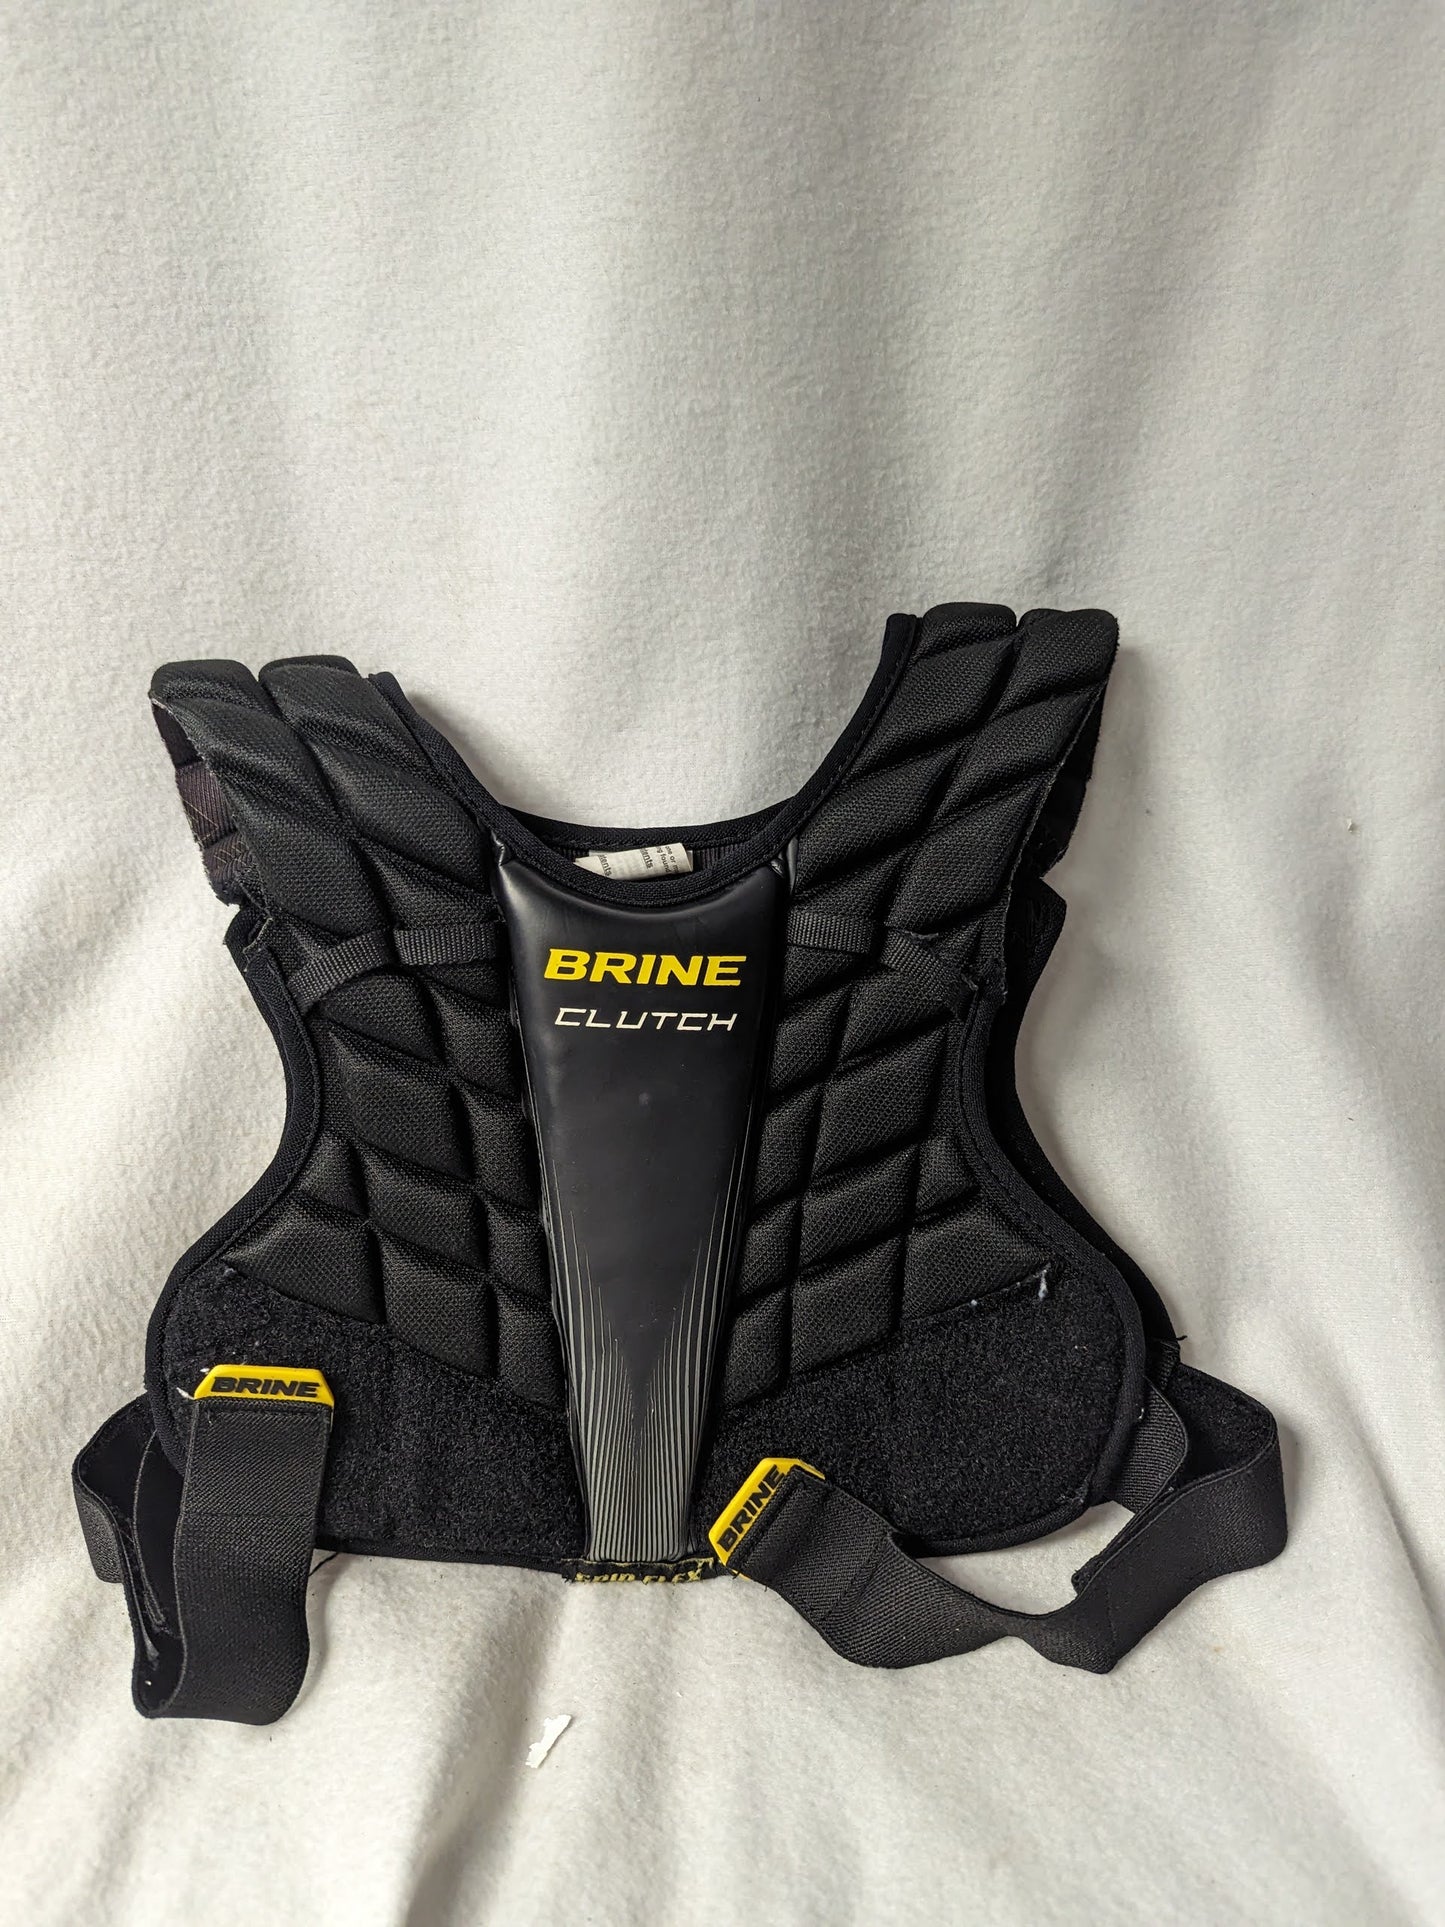 Brine Lacrosse Chest Pads Size Small Color Black Condition Used